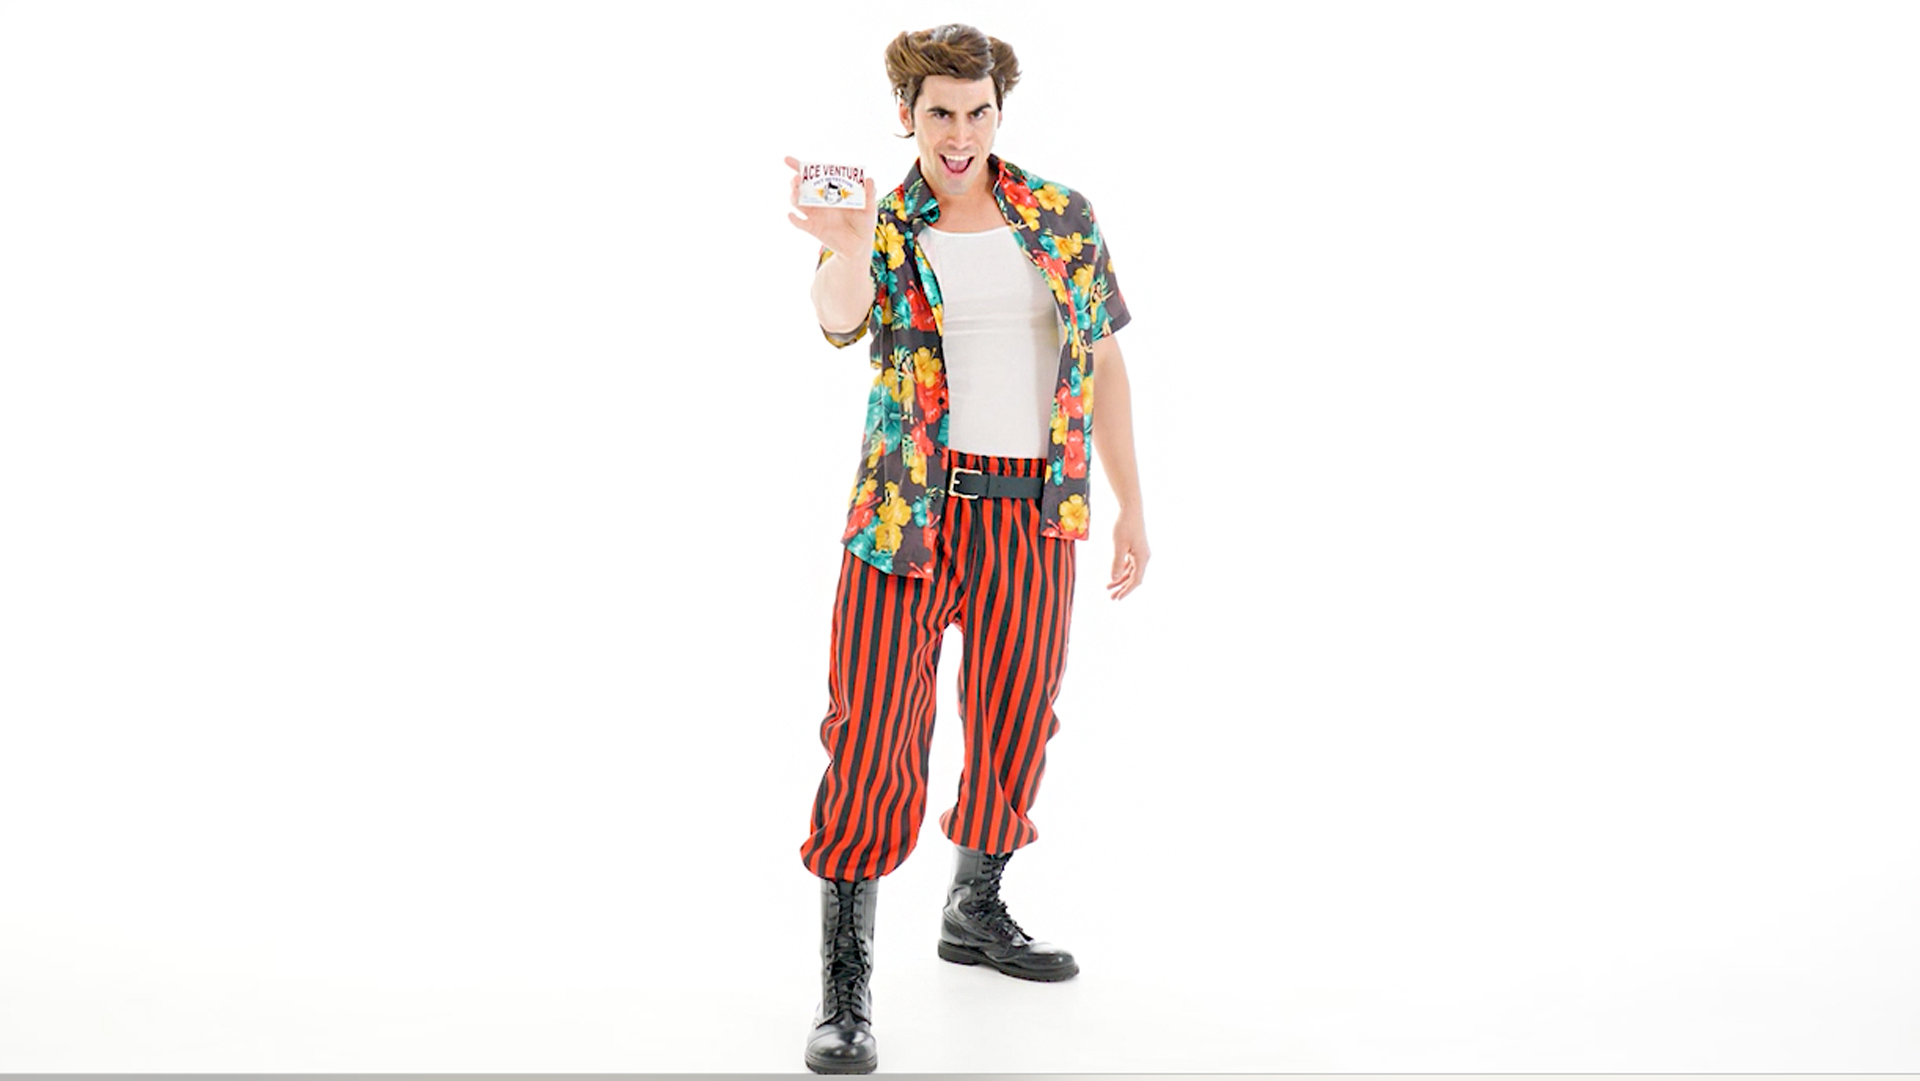 No everyone has what it takes to be a pet detective! Do you? With this Ace Ventura Costume with Wig you'll at least look the part.